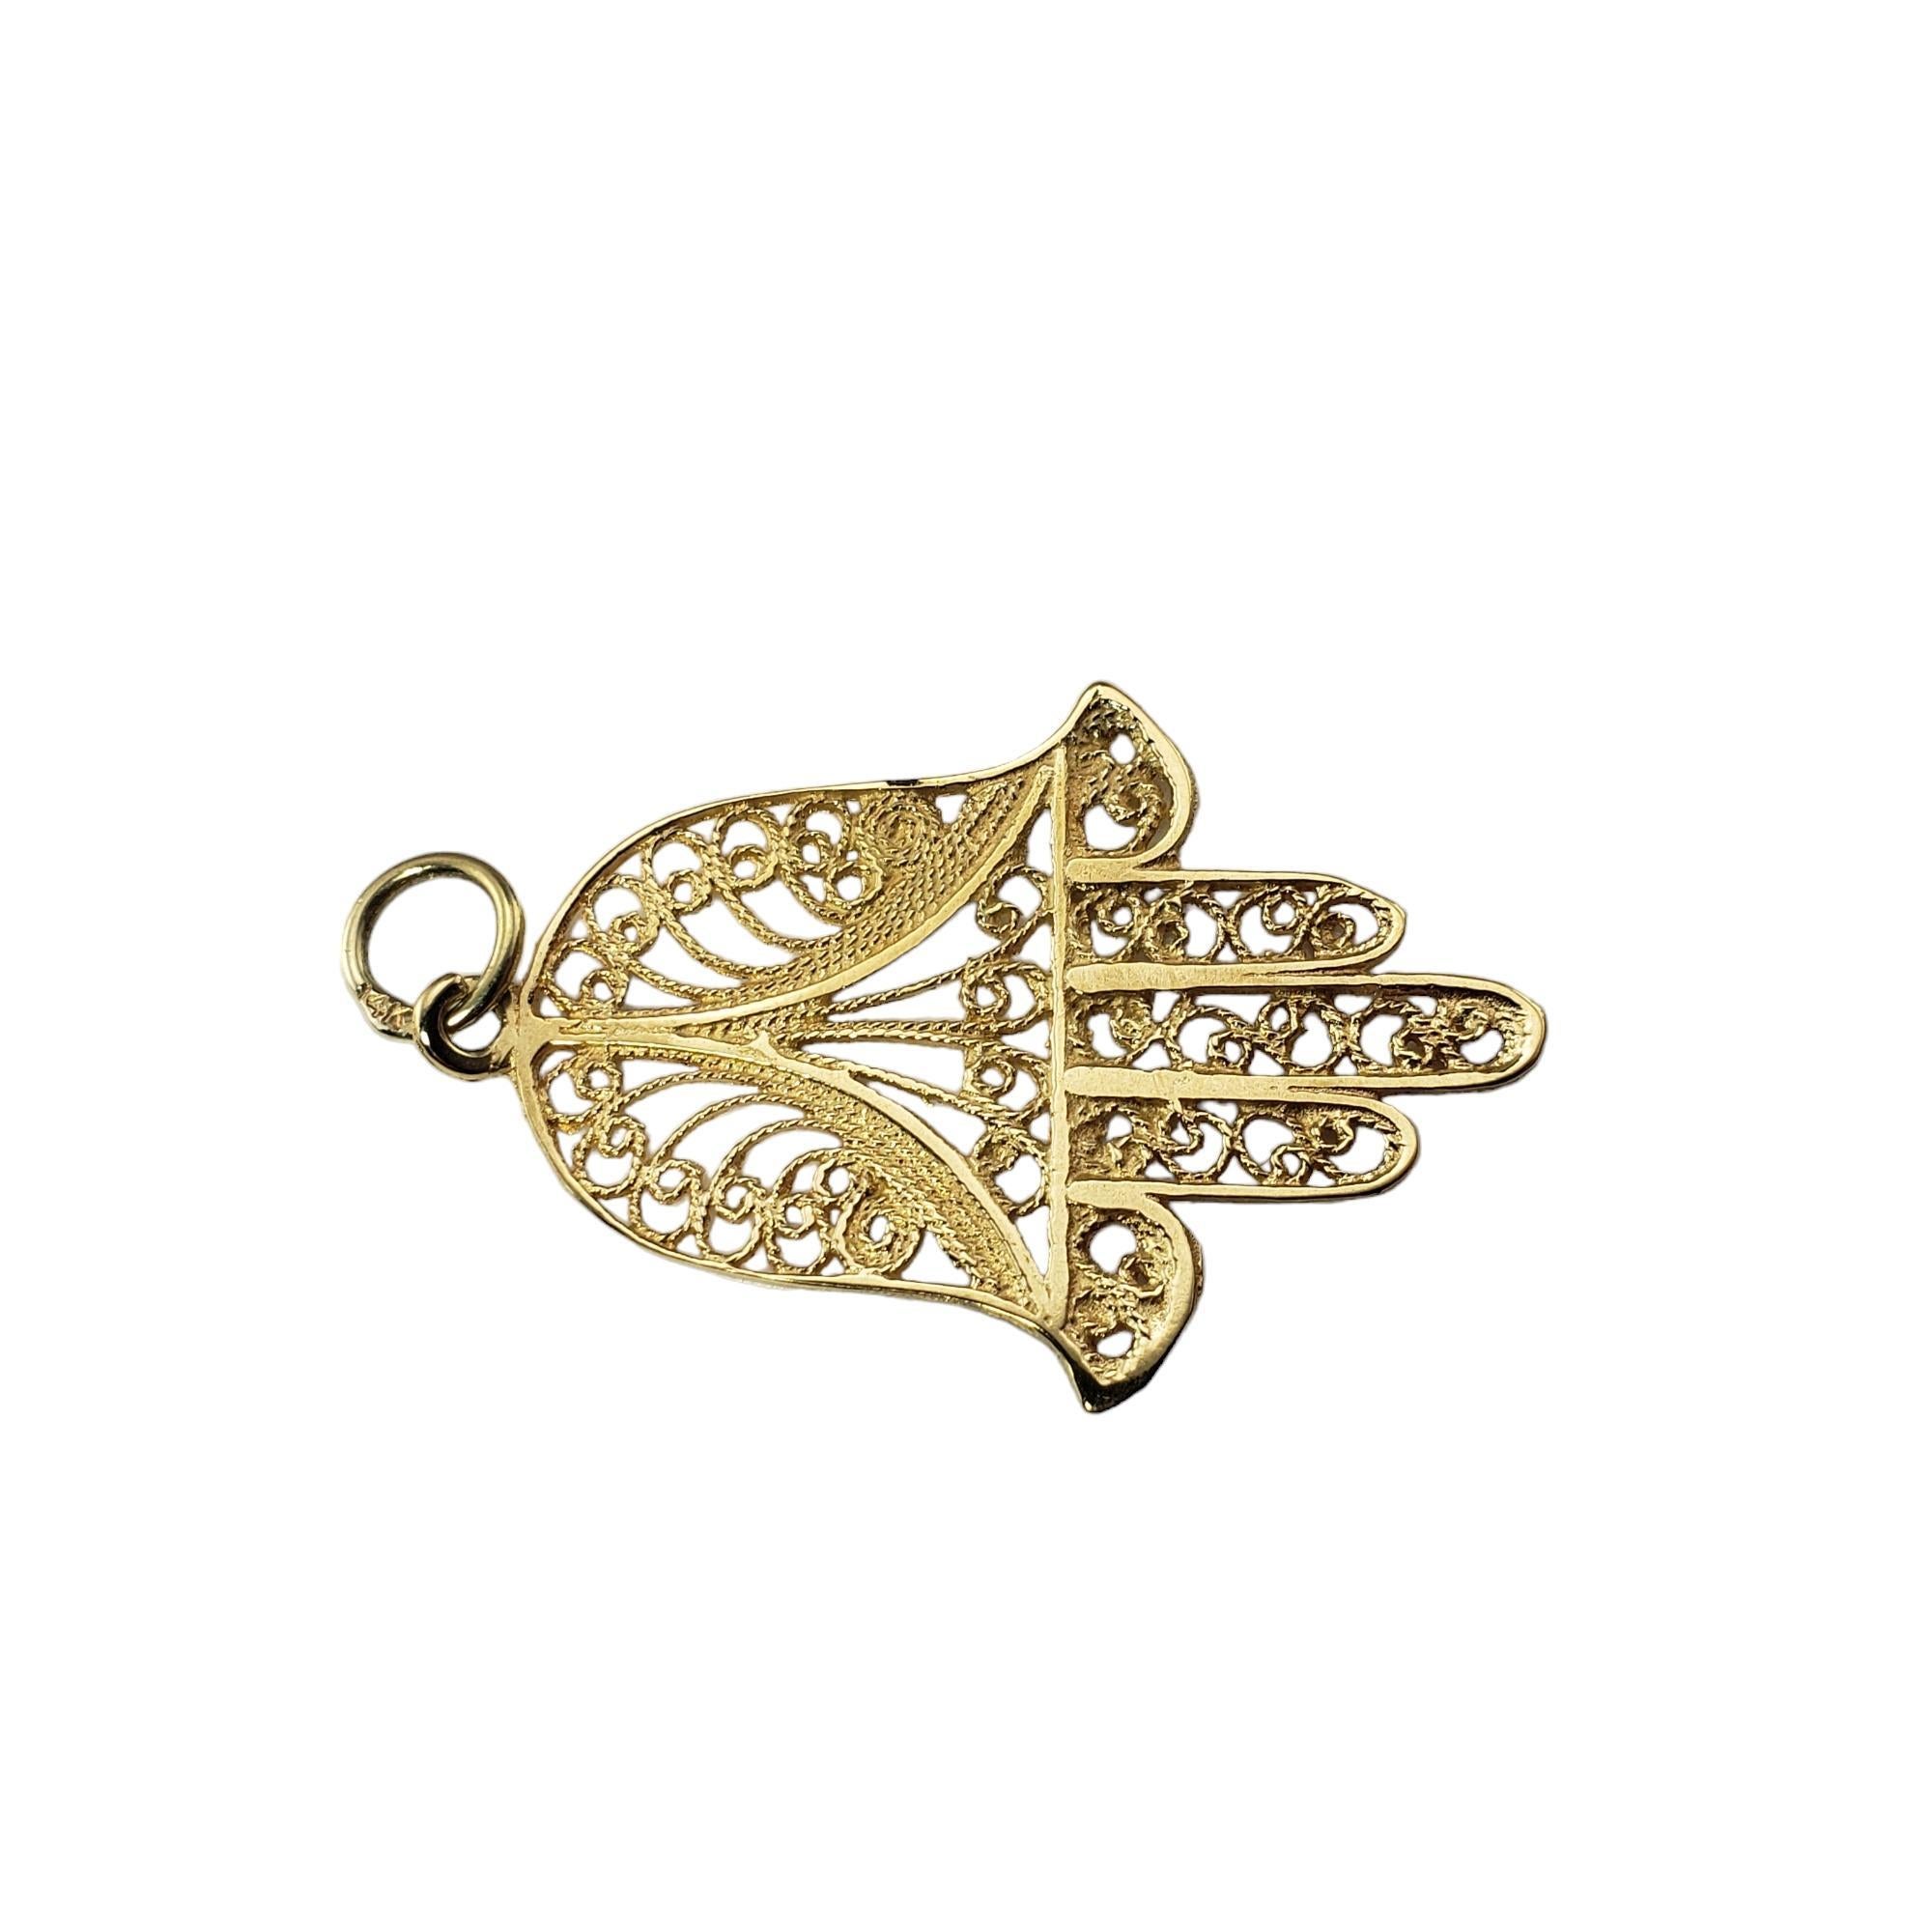 Vintage 14 Karat Yellow Gold Hamsa Pendant-

The Hamsa is believed to channel the forces of good, bringing happiness to all who wear it.  Crafted in beautifully detailed 14K yellow gold filigree.

Size: 36.3 mm x 25.4 mm

Stamped: 14K

Weight:  2.4